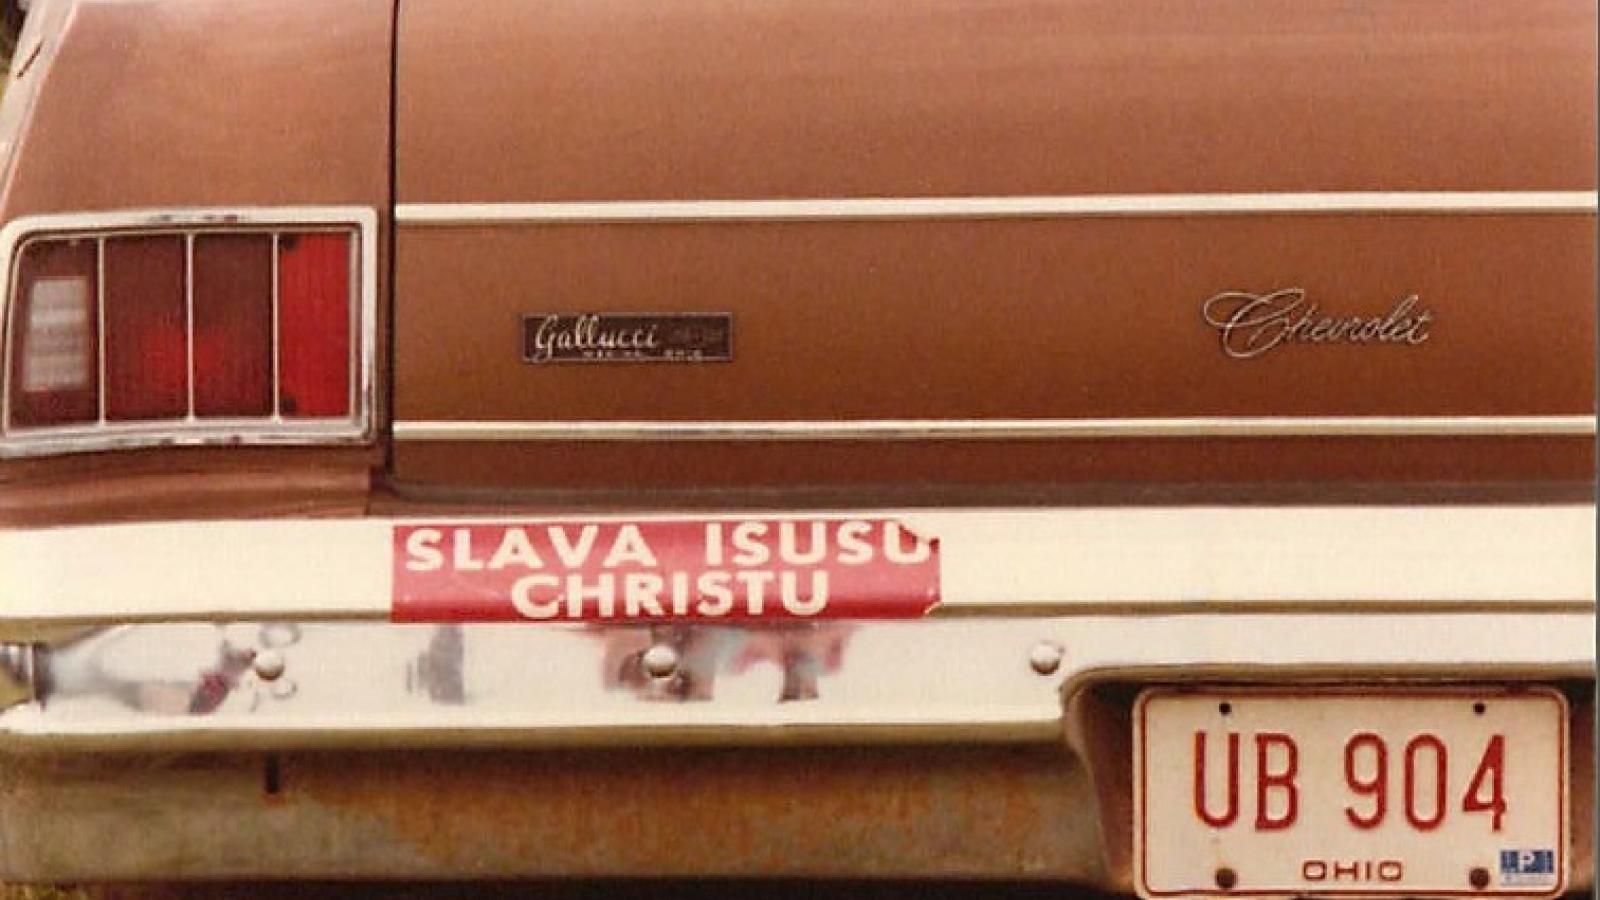 Bumper sticker reading "Glory to Jesus Christ" in Russian words with Latin script.